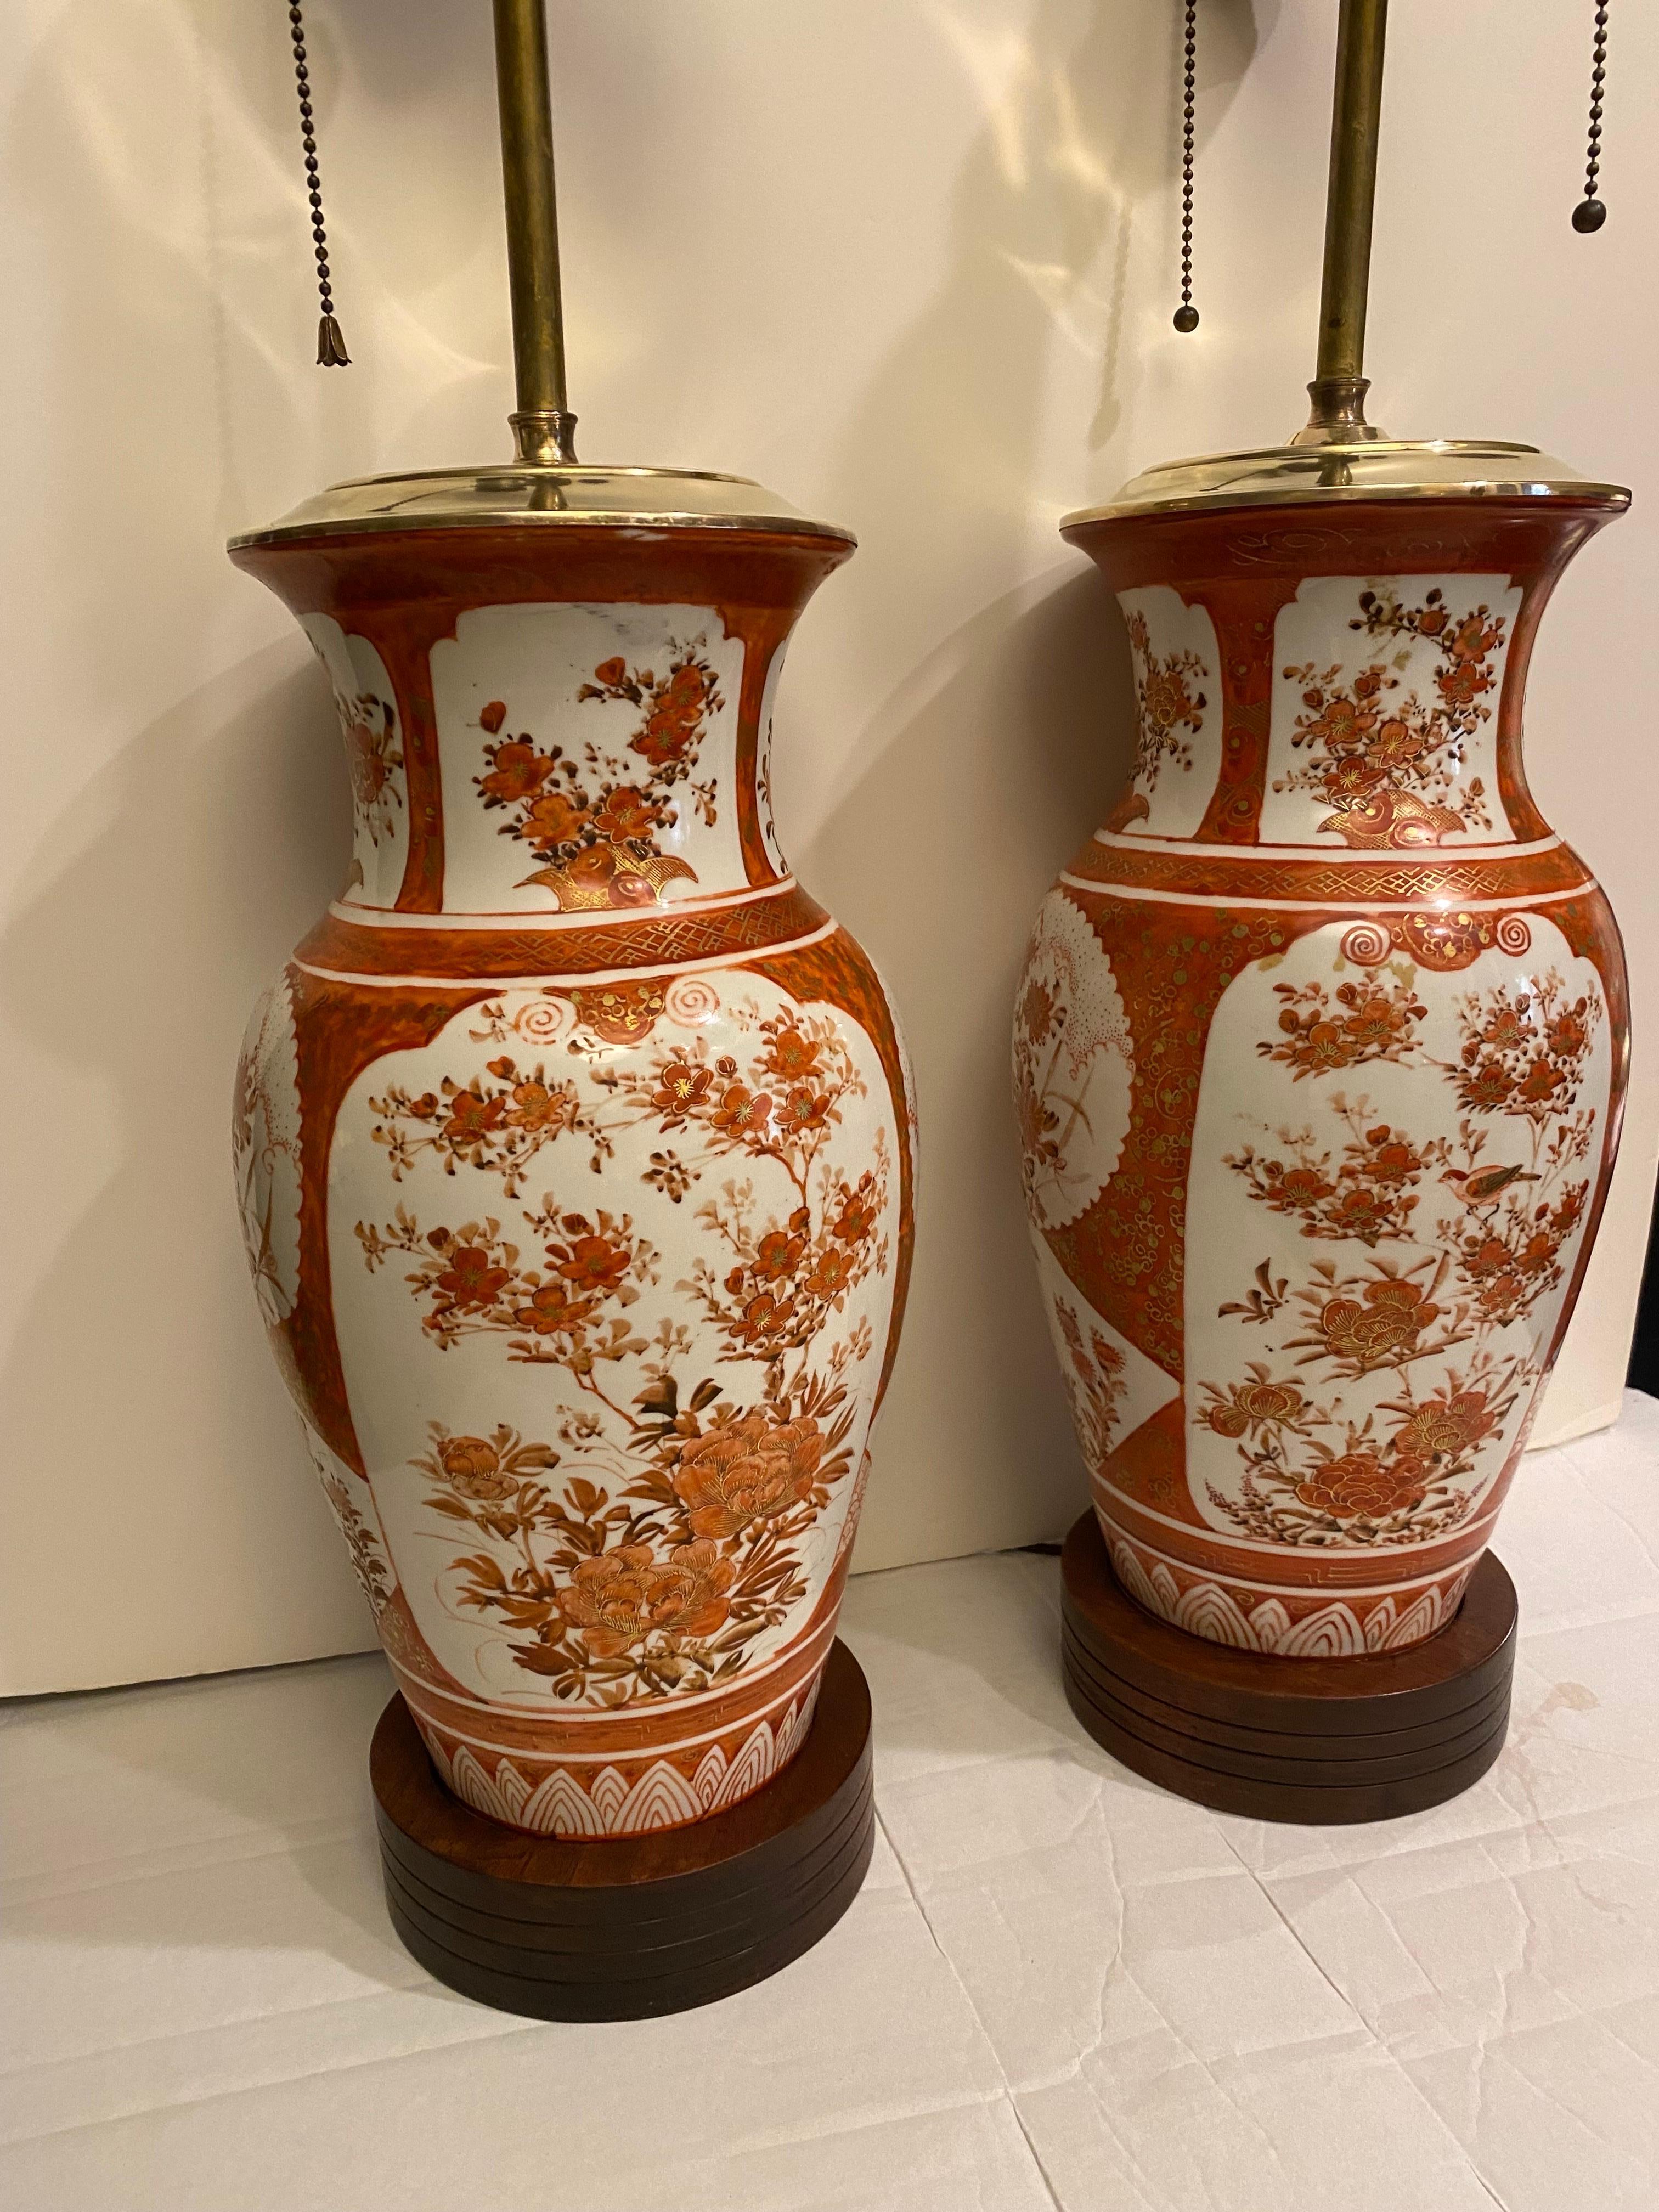 A classic pair of Iron red Kutani porcelain lamps.  The Meiji Period circa 1880 vases, now as lamps.  These elegant fine Japanese porcelain vases we converted to lamps in the early part of the 20th Century, around 1920, Measuring 30 inches high, and